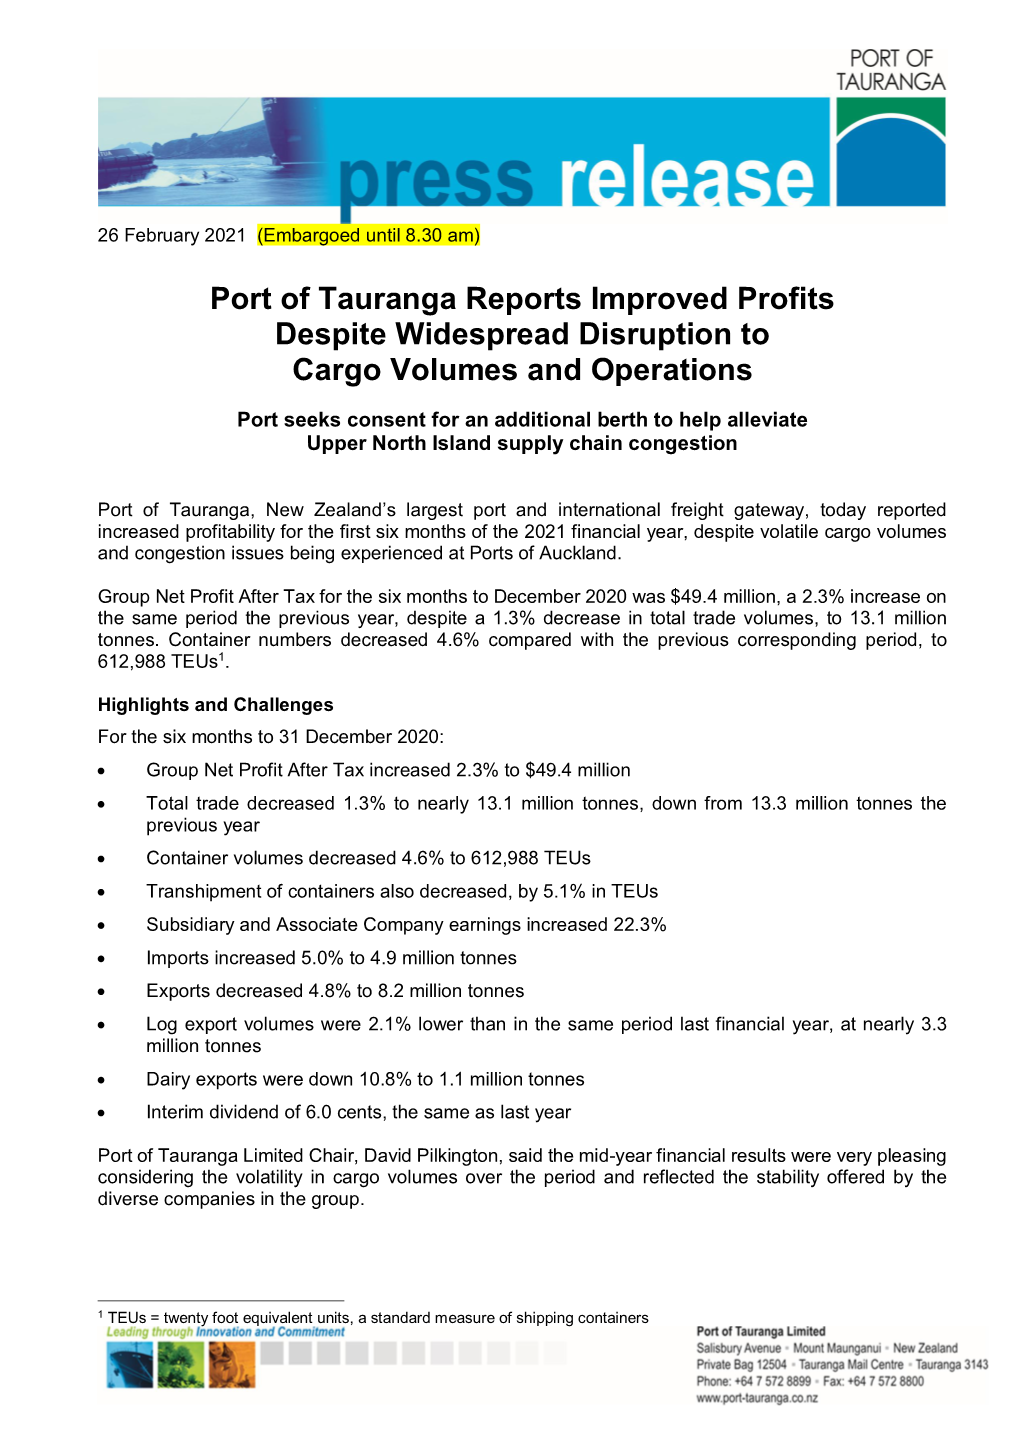 Port of Tauranga Reports Improved Profits Despite Widespread Disruption to Cargo Volumes and Operations